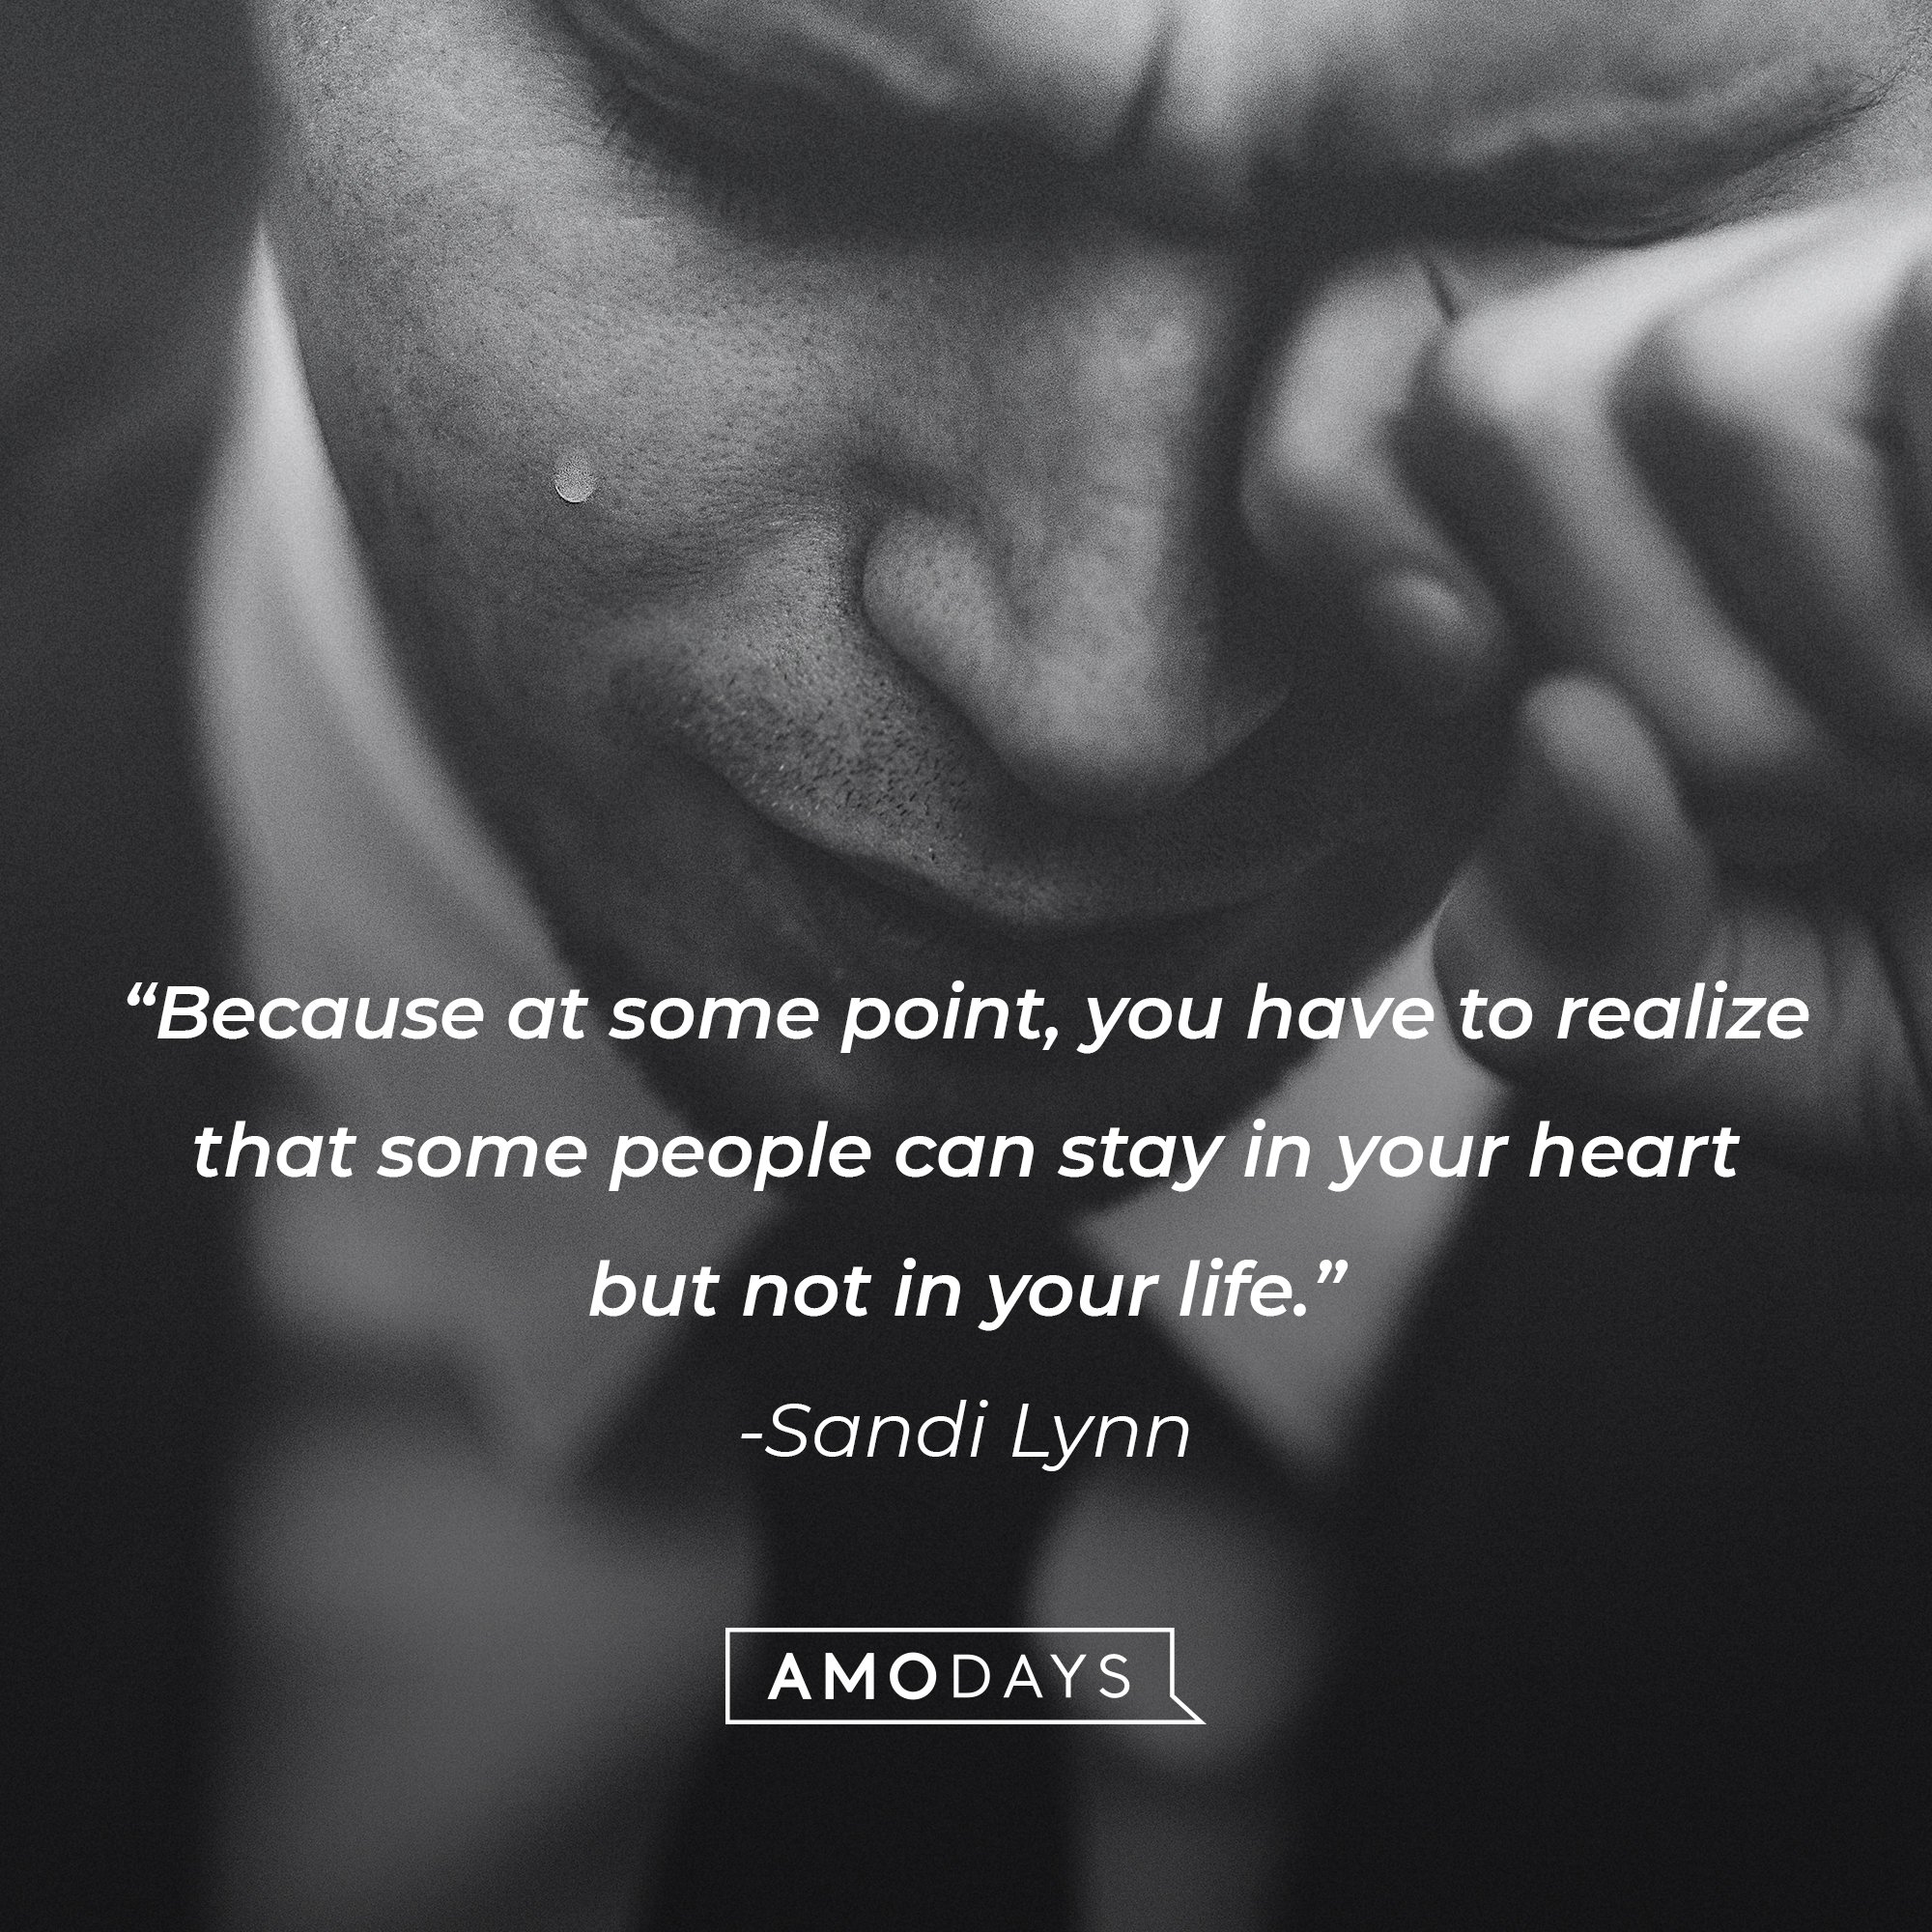 Sandi Lynn’s quote: "Because at some point, you have to realize that some people can stay in your heart but not in your life." | Image: AmoDays